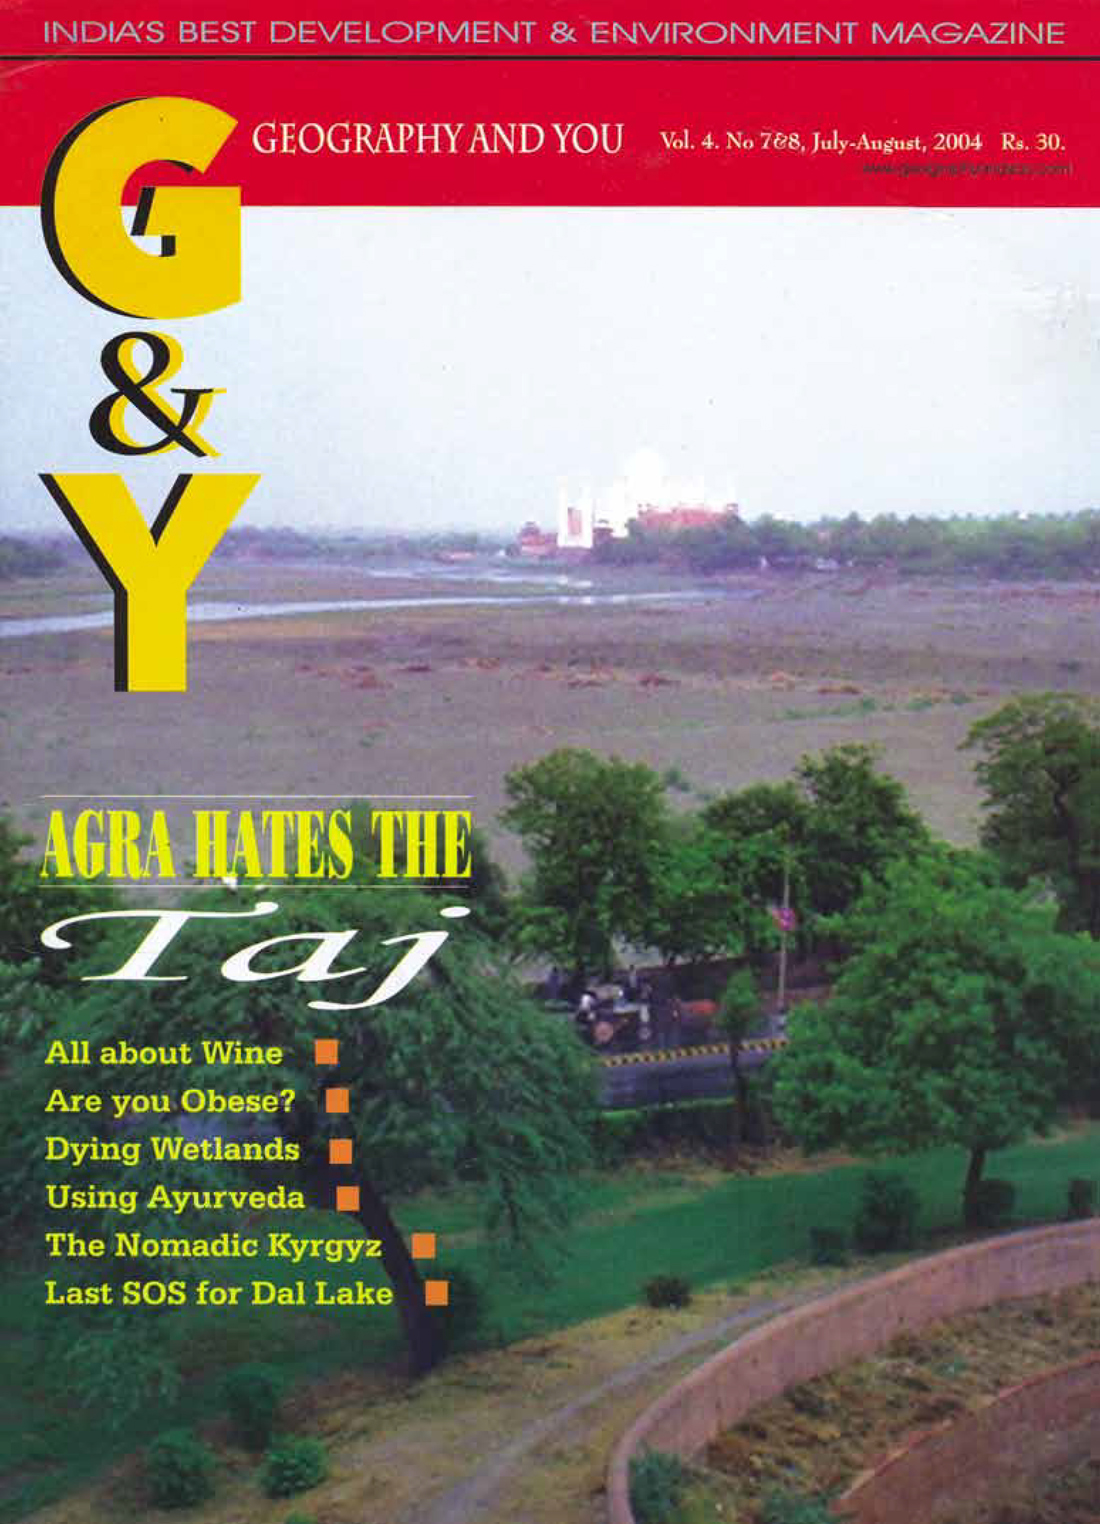 Agra Hates the Taj (July-August 2004) cover